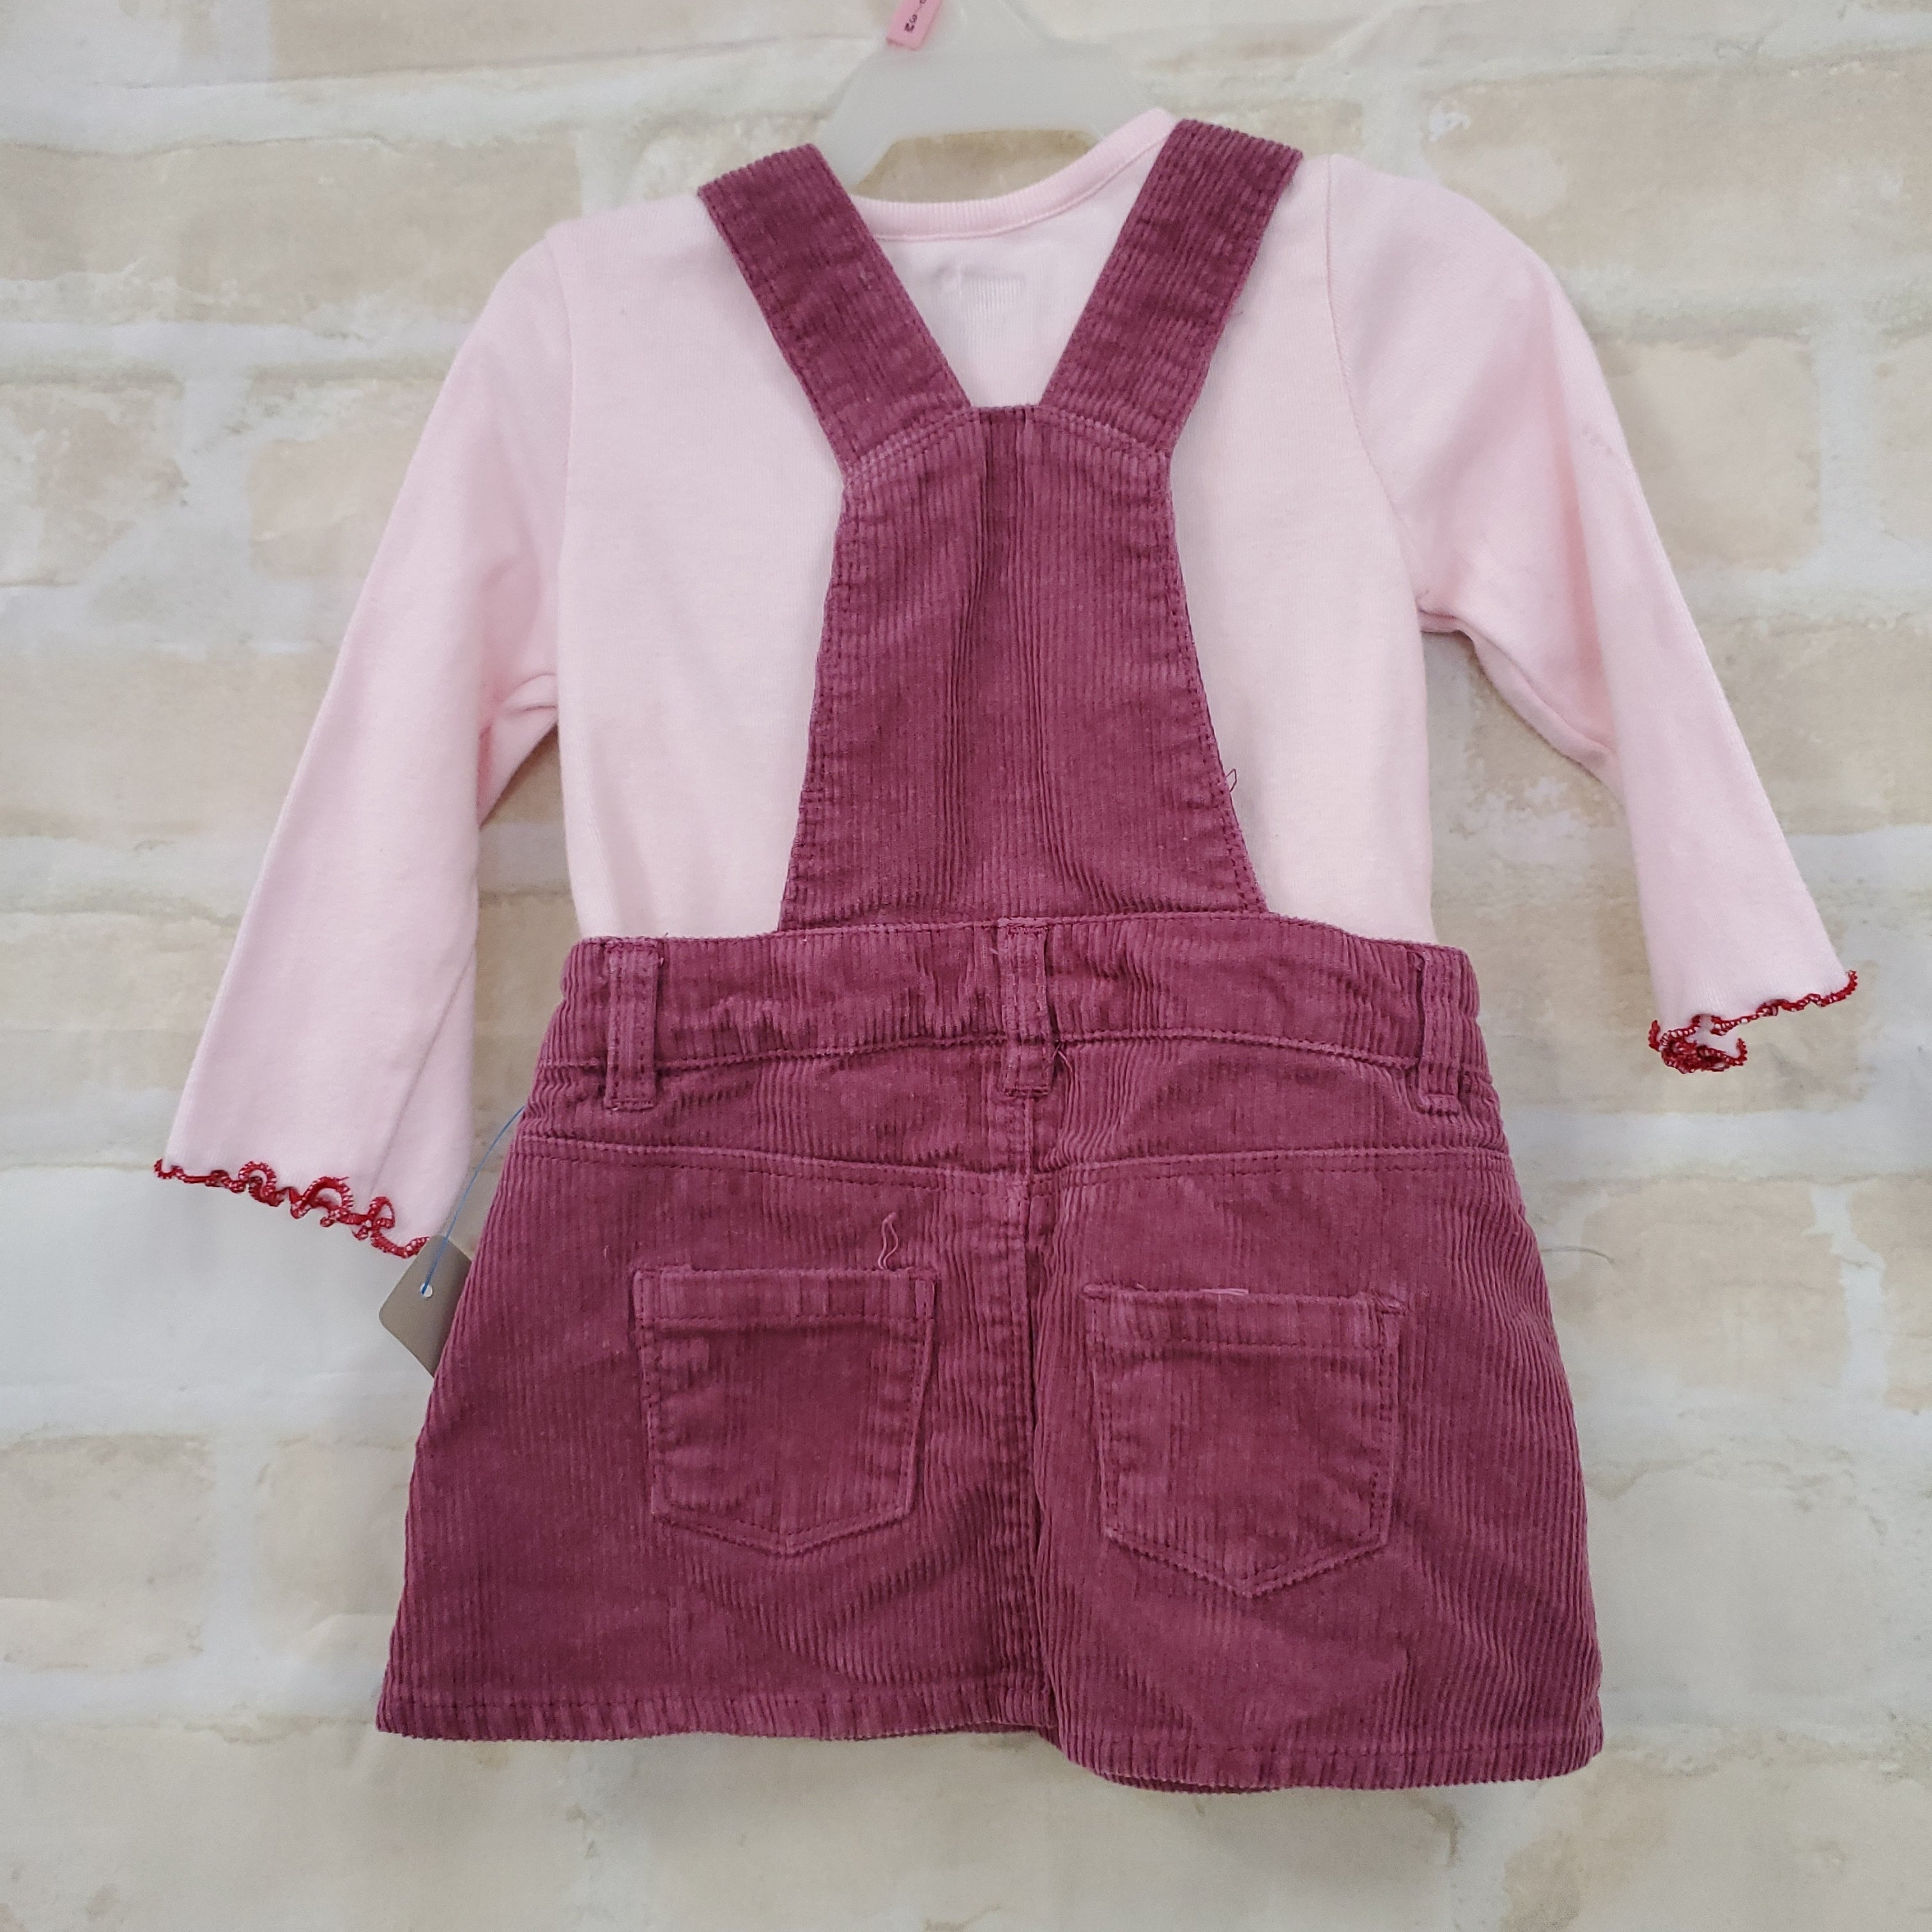 Baby 8 girls 2 pc set pink top L/S coveralls dusty rose 6-12m